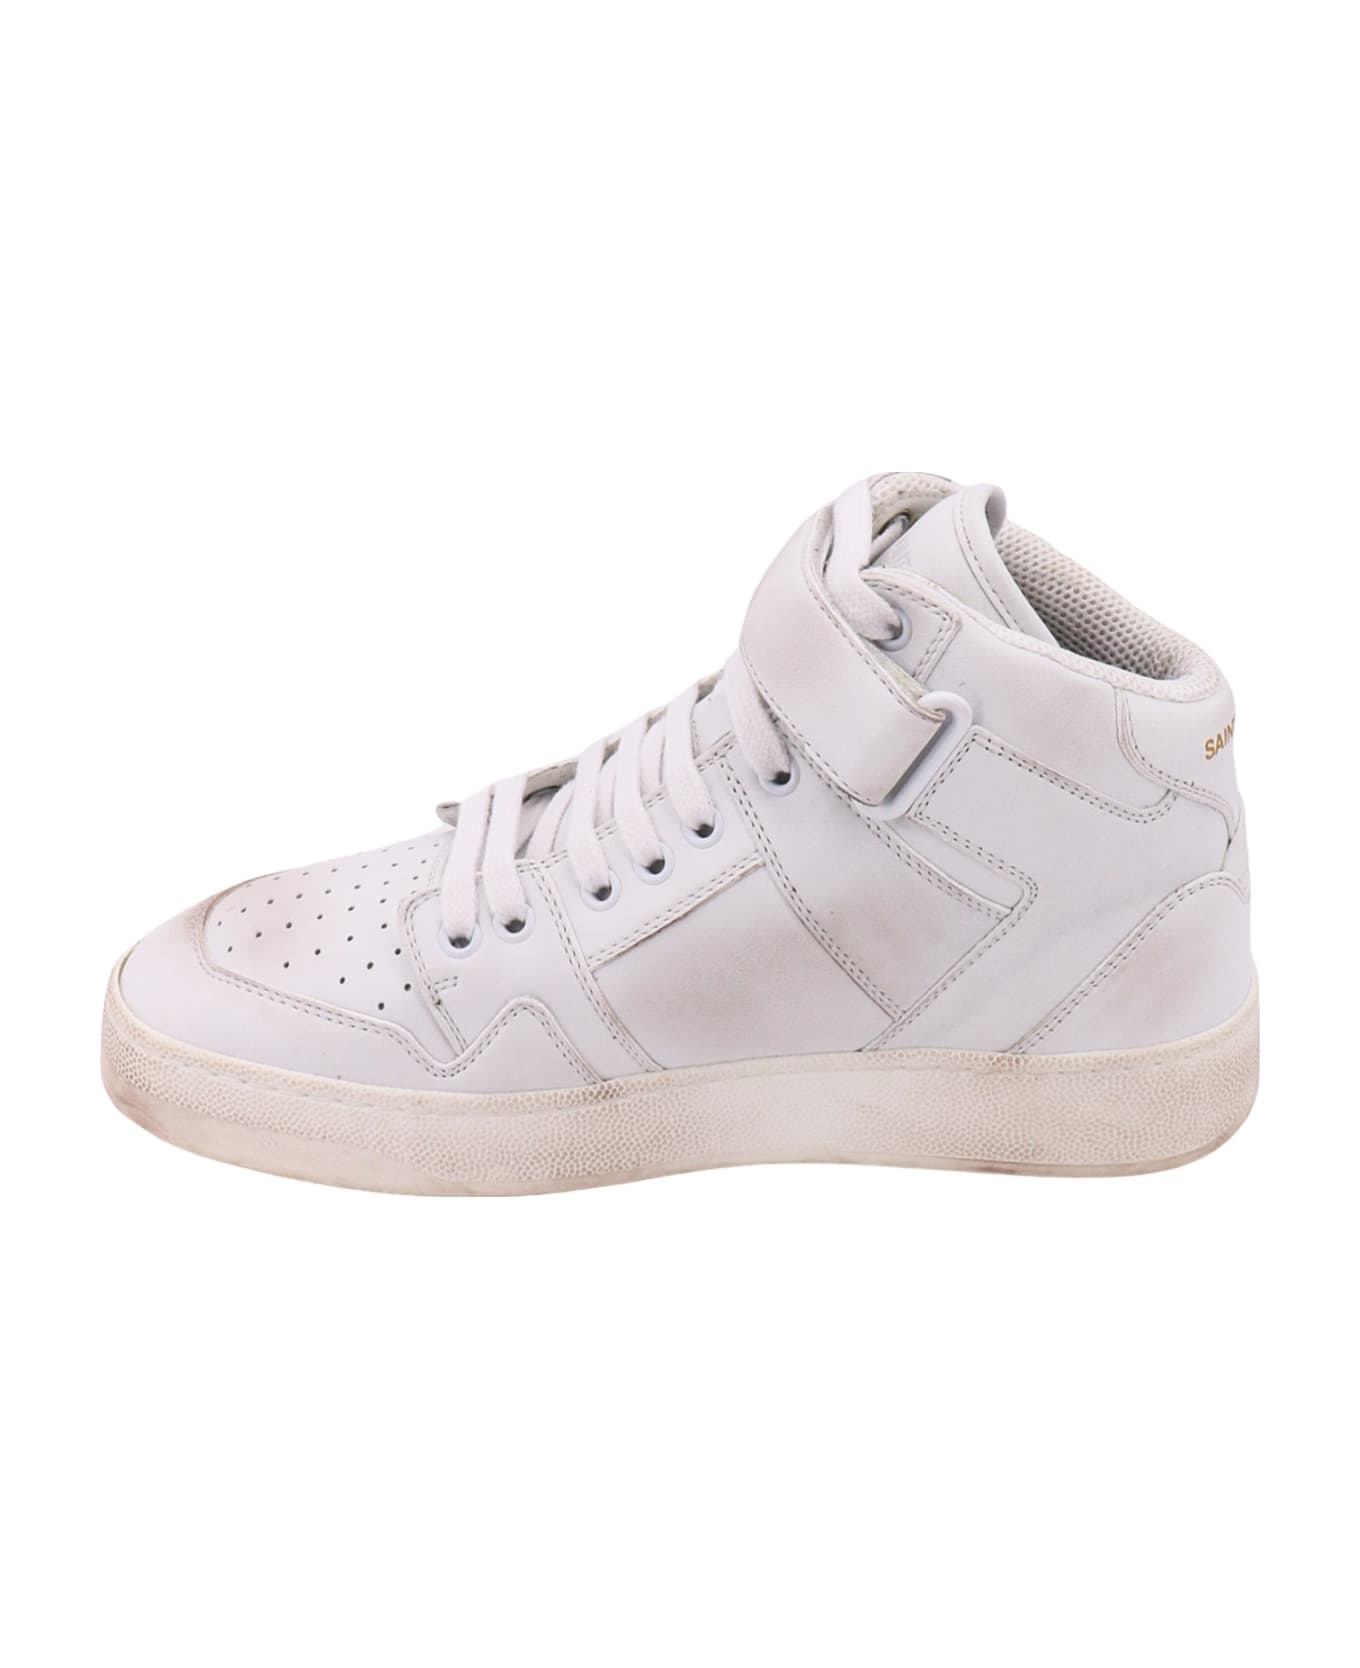 Saint Laurent Lax Sneakers In Washed-out Effect Leather - White